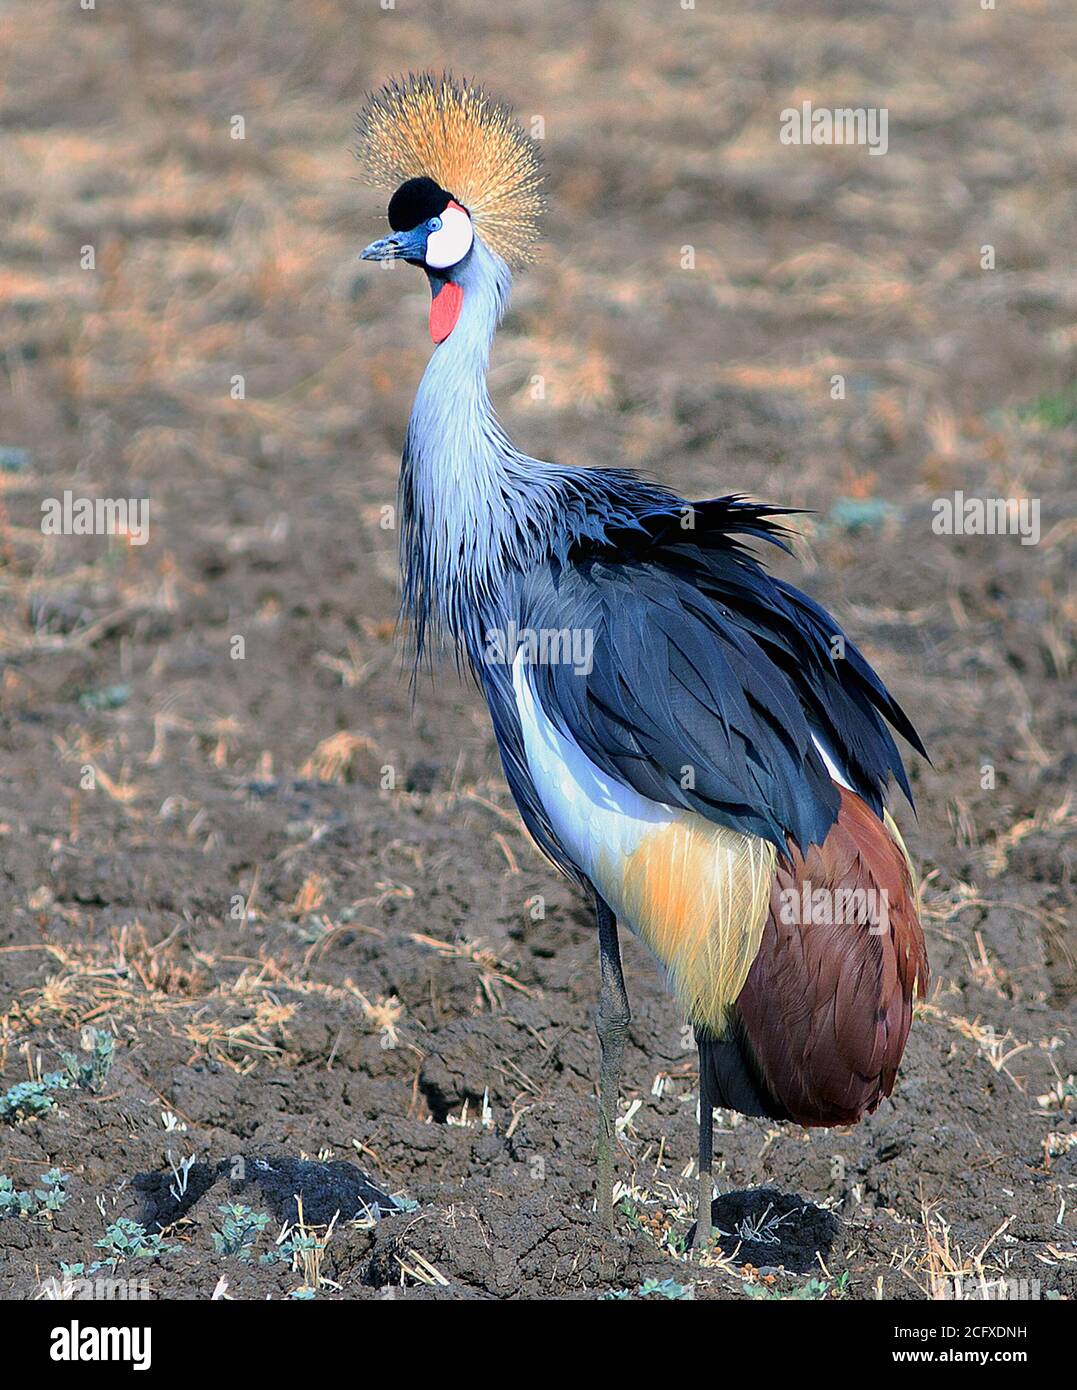 Grey Crowned (Crested) Crane (Balearica regulorum) Standing on the dry mud in South Luangwa National Park, Zambia, Southern Africa Stock Photo